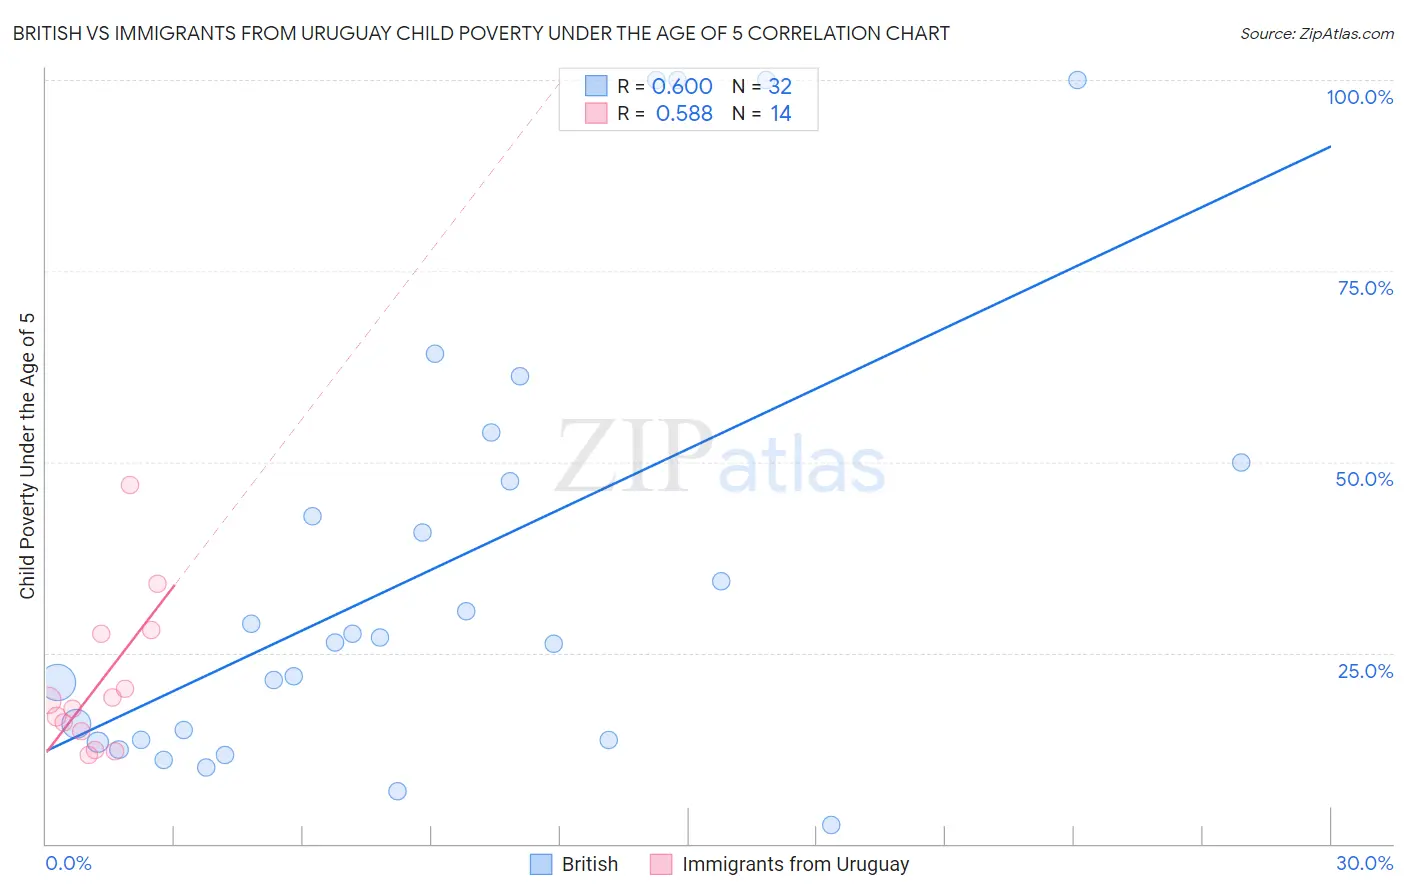 British vs Immigrants from Uruguay Child Poverty Under the Age of 5